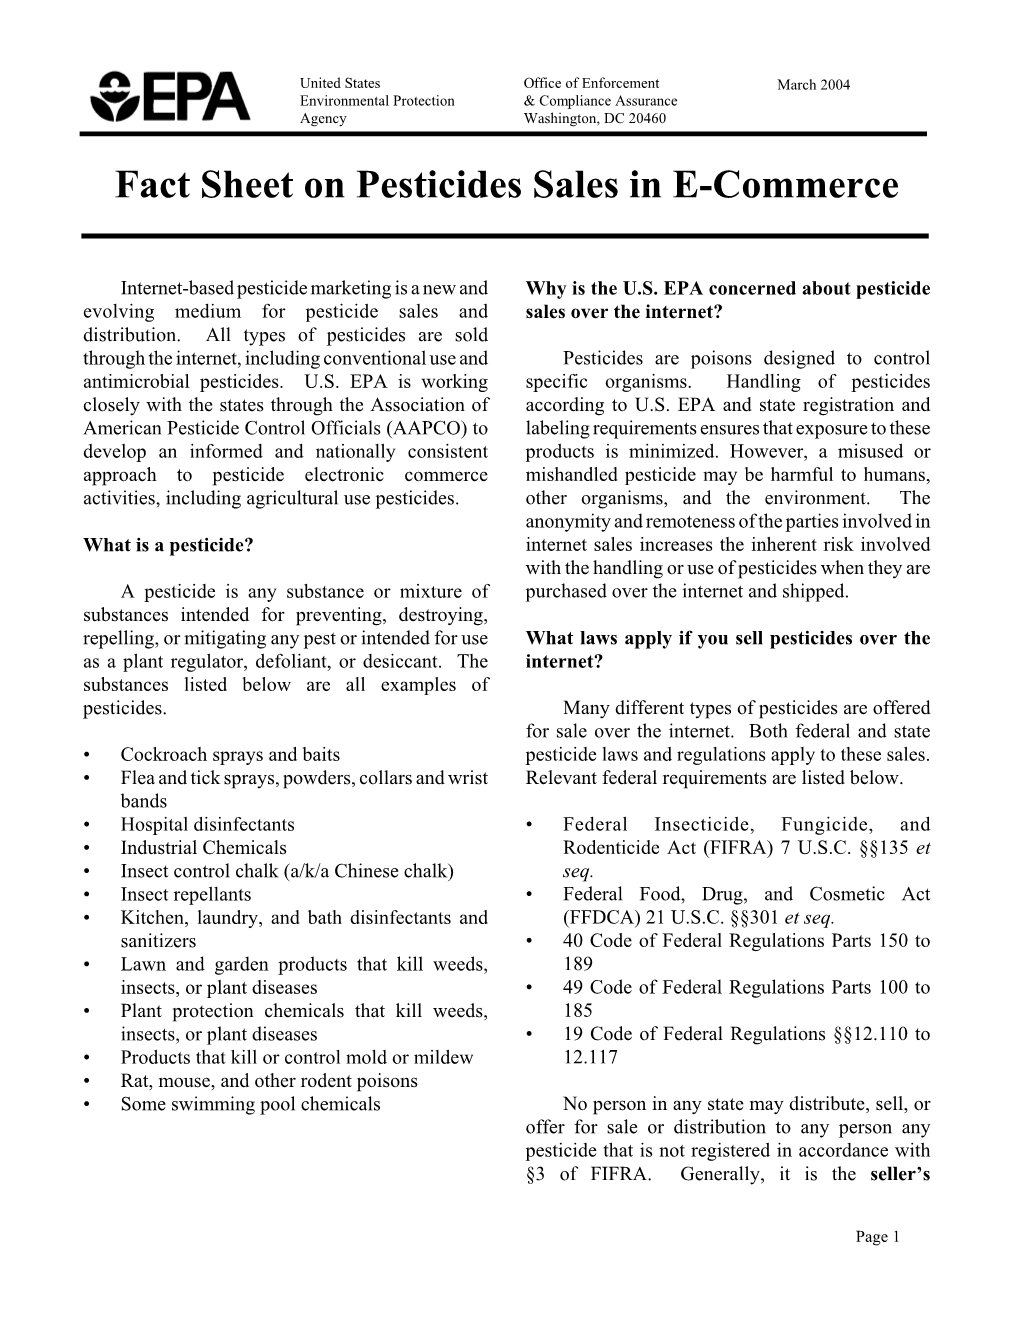 EPA Fact Sheet on Pesticides Sales in E-Commerce